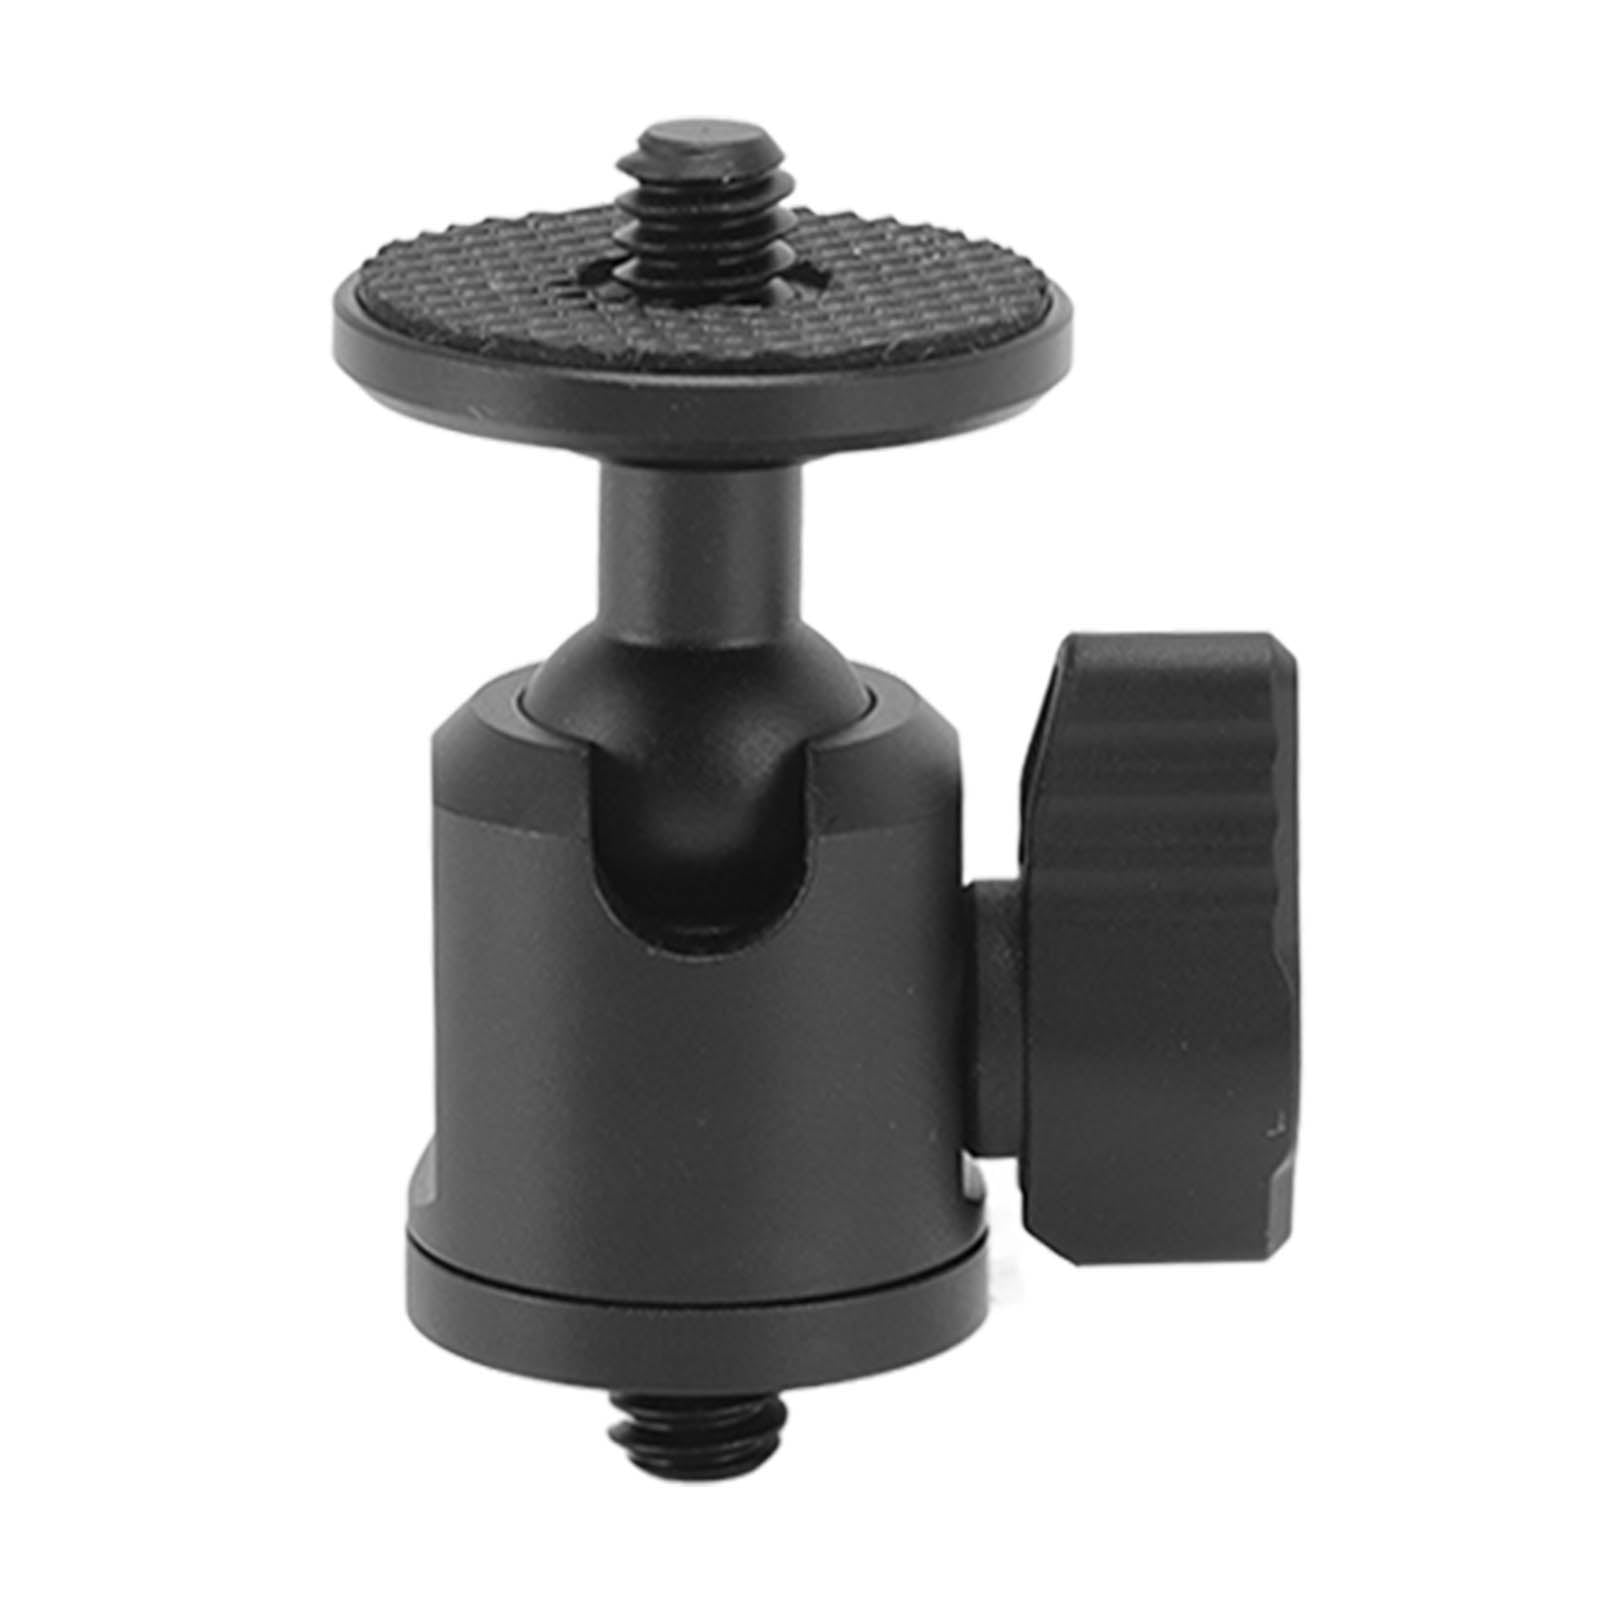 Tosuny Multi-Function 360° Double Ballhead Mount Standard Hot Shoe with 1/4 Screw for Cameras or Devices with 1/4 Inch Post 